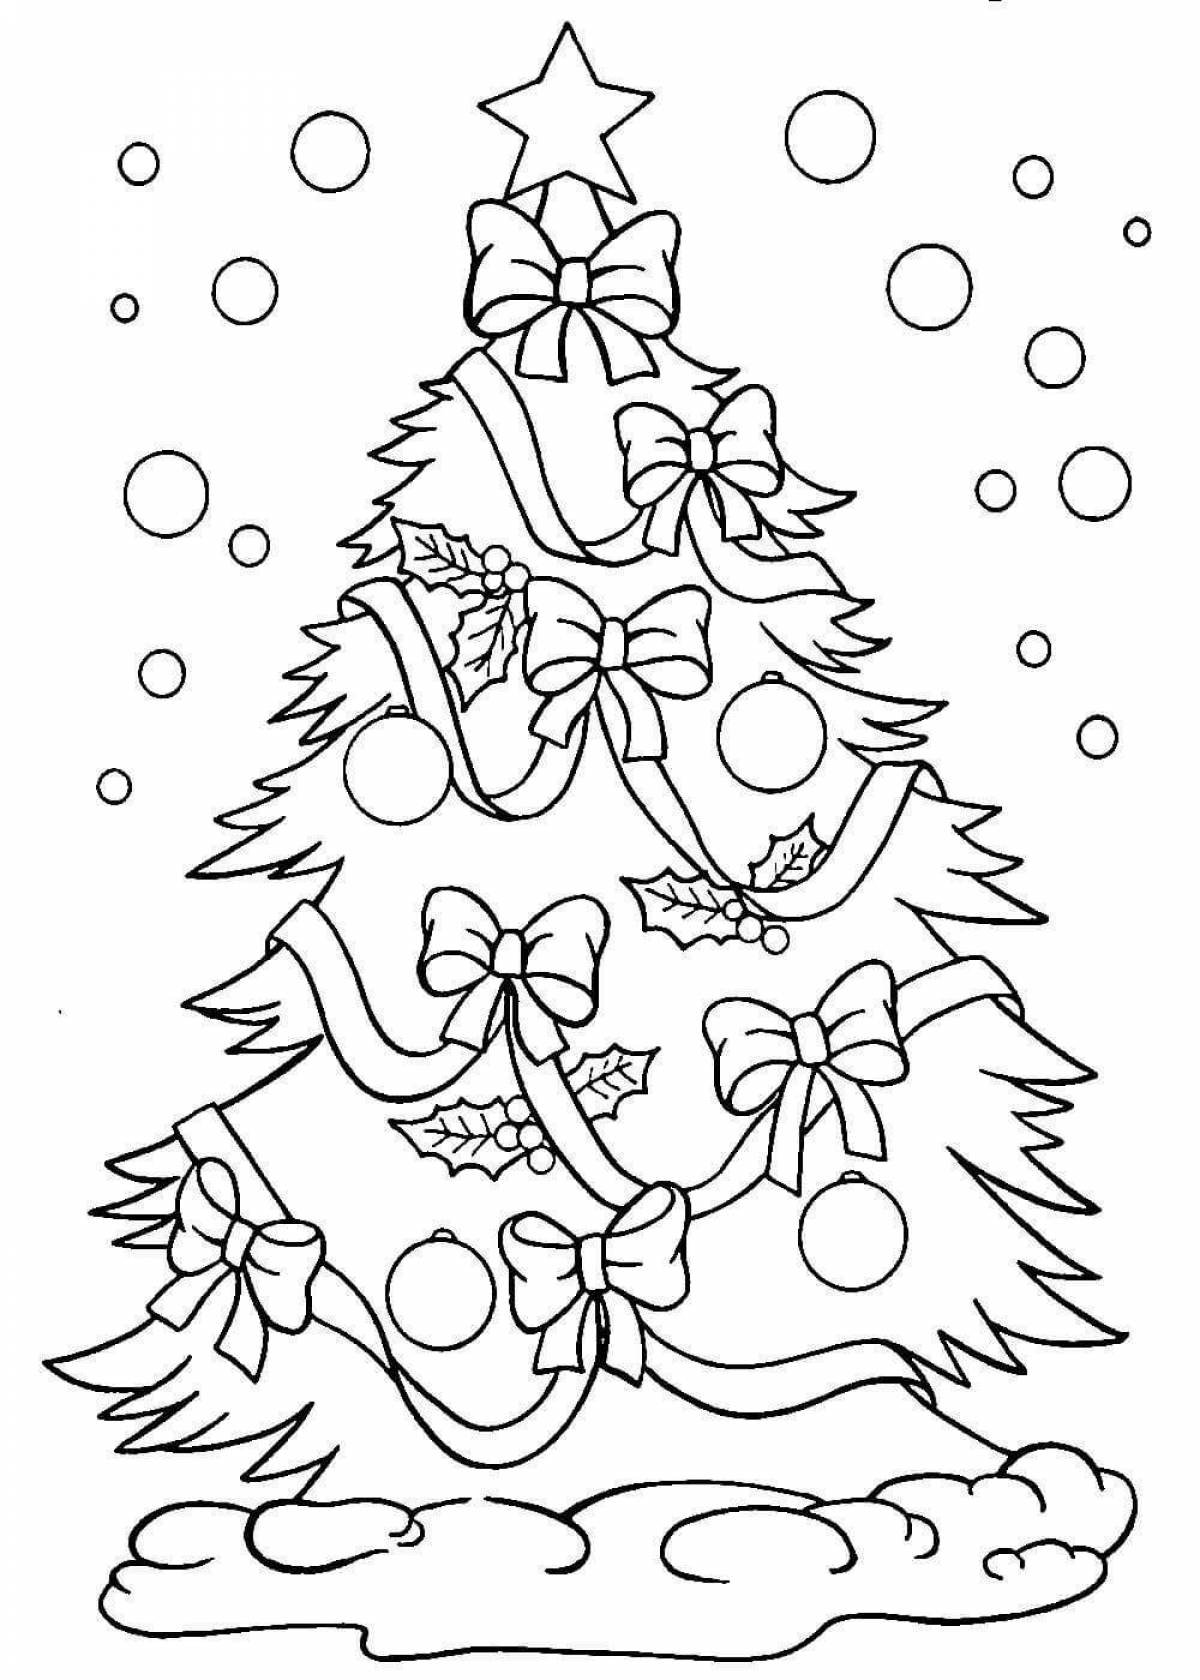 Christmas tree playful coloring book for 3-4 year olds